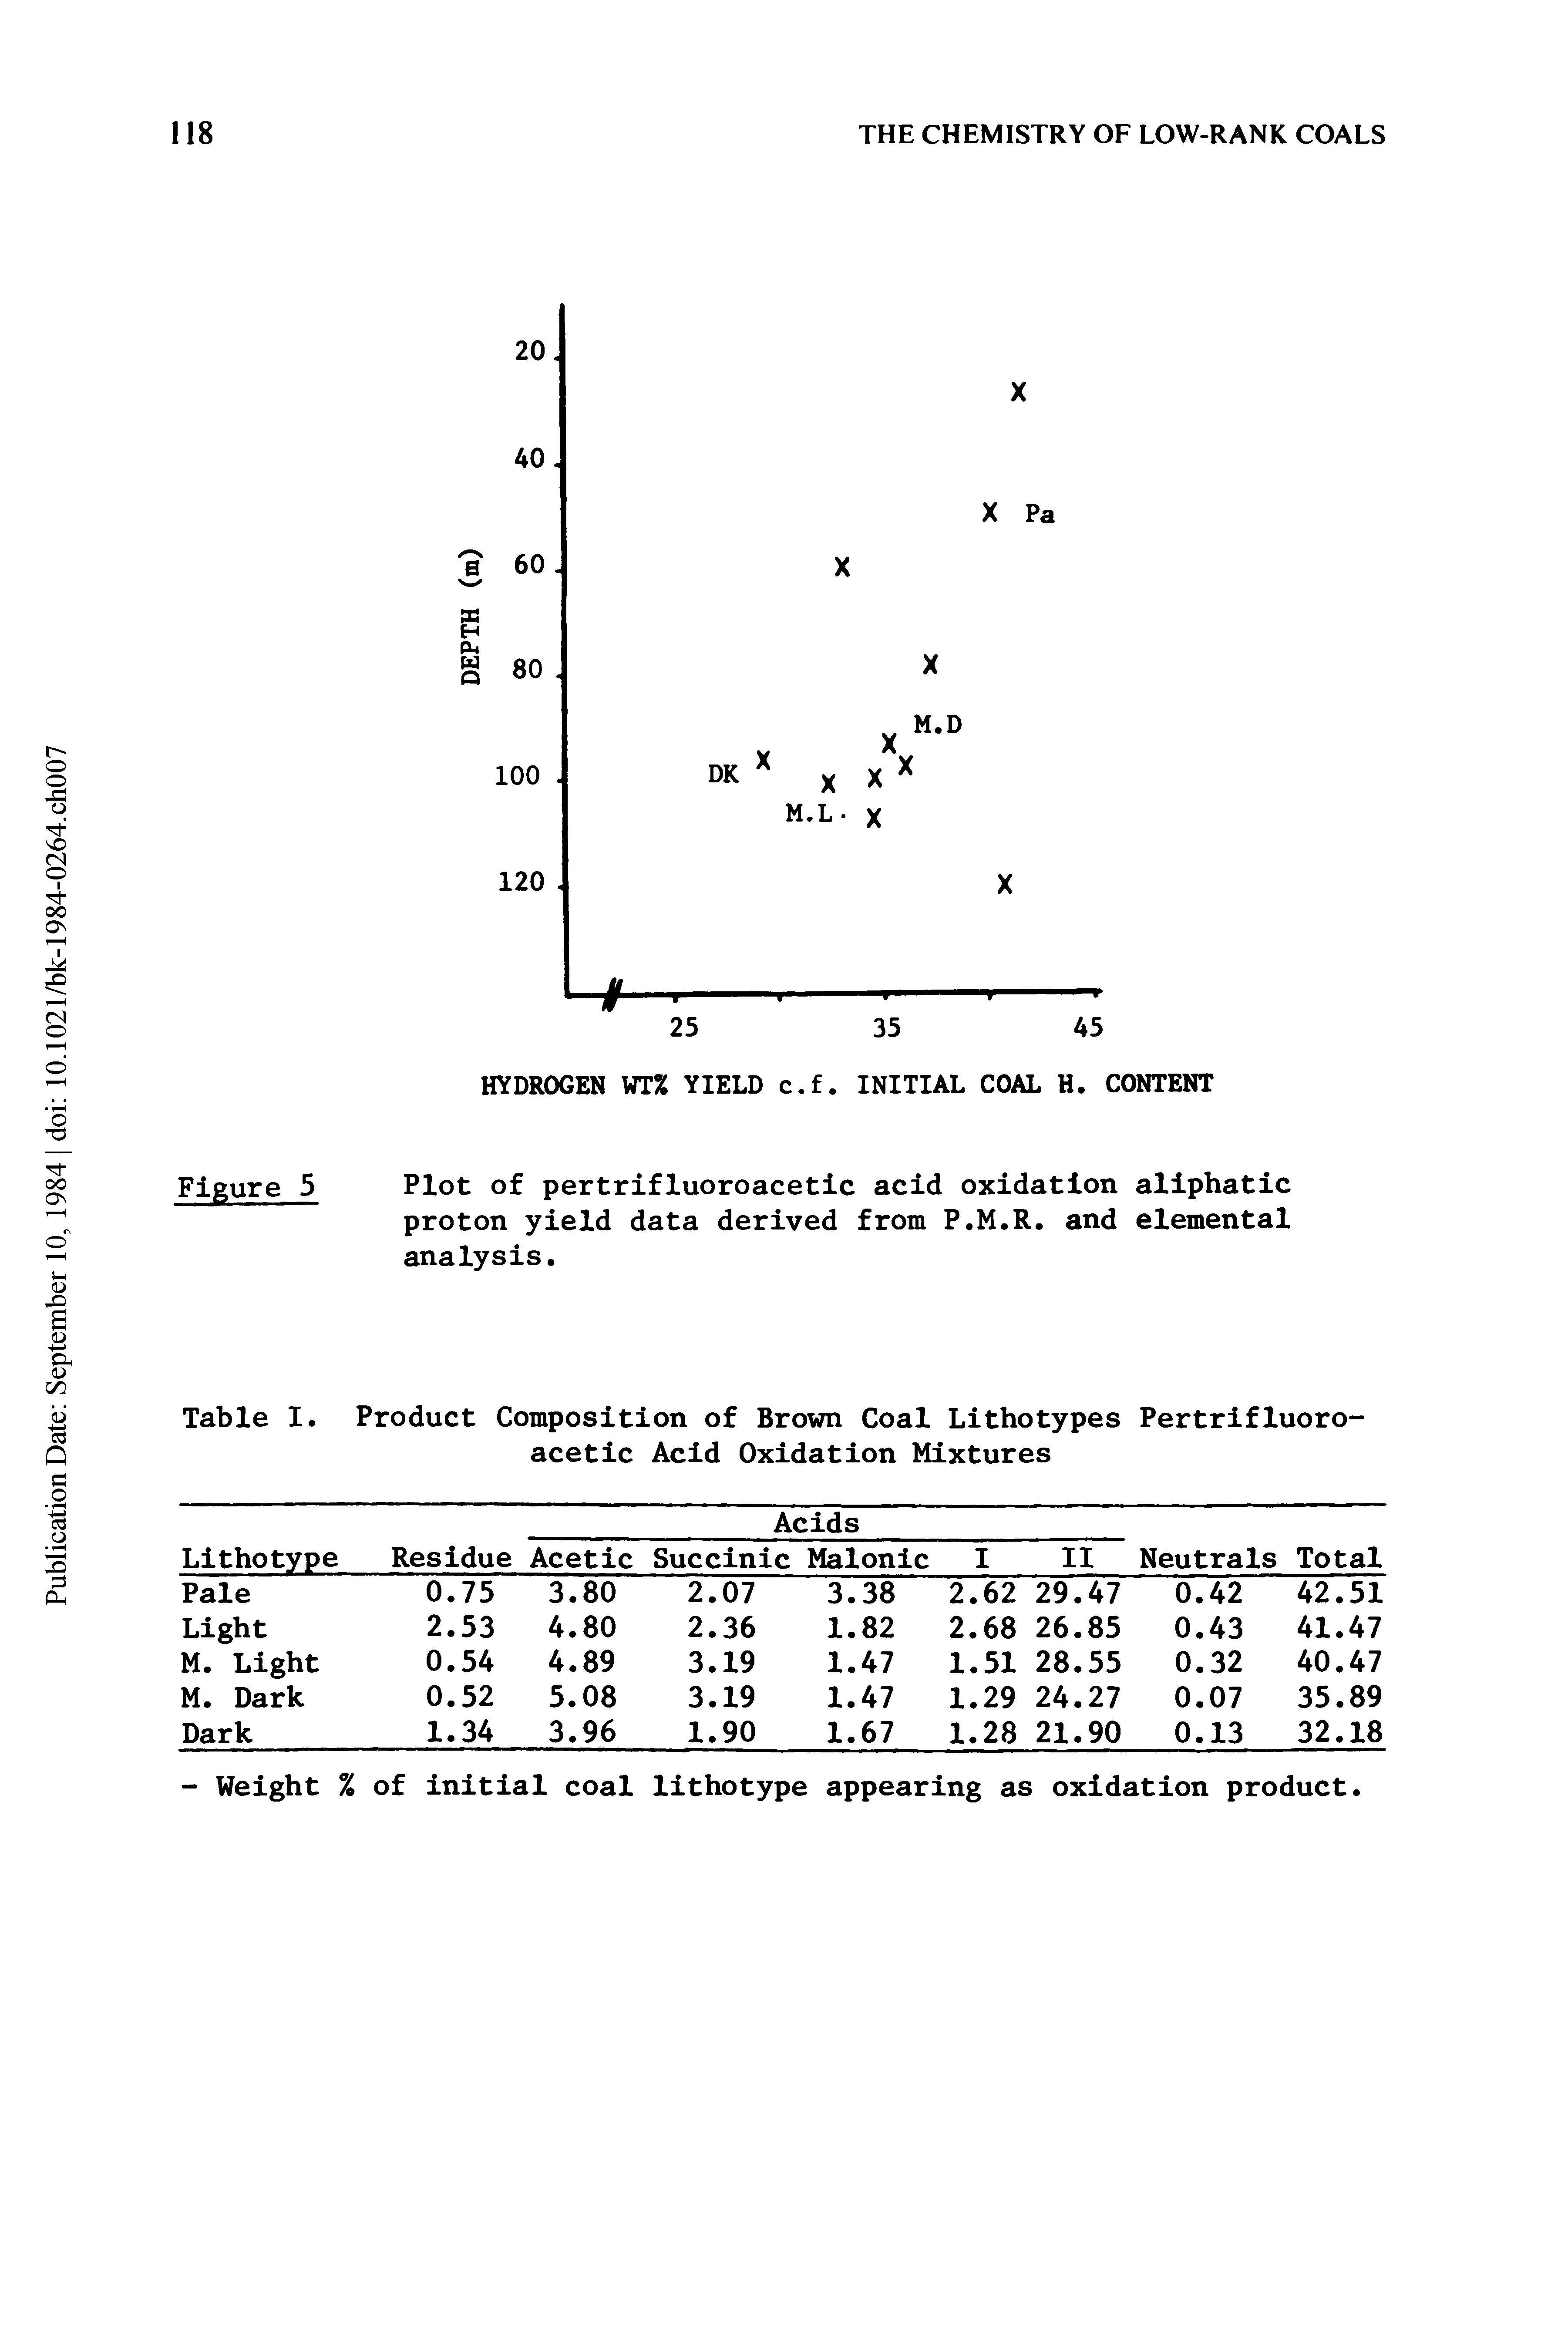 Figure 5 Plot of pertrifluoroacetic acid oxidation aliphatic proton yield data derived from P.M.R. and elemental analysis.